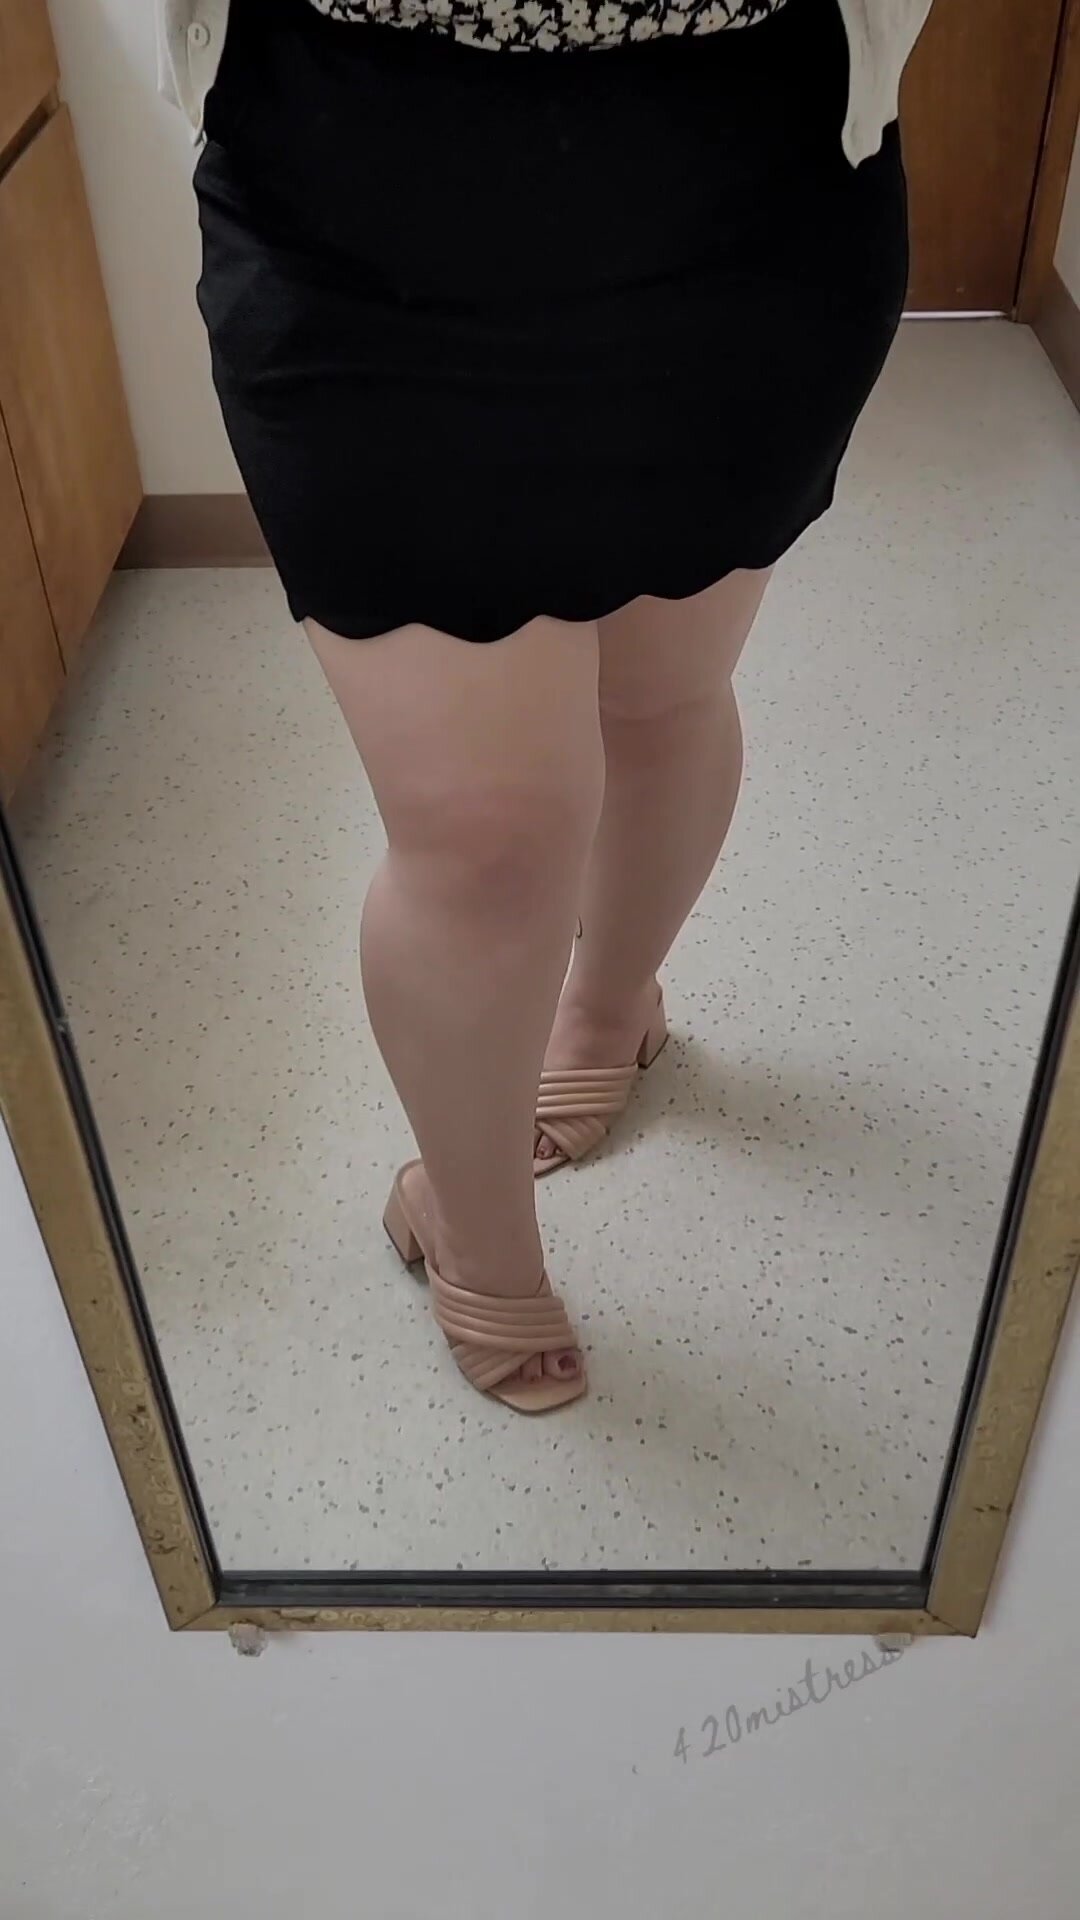 Ever wanted to fuck your thick coworker?